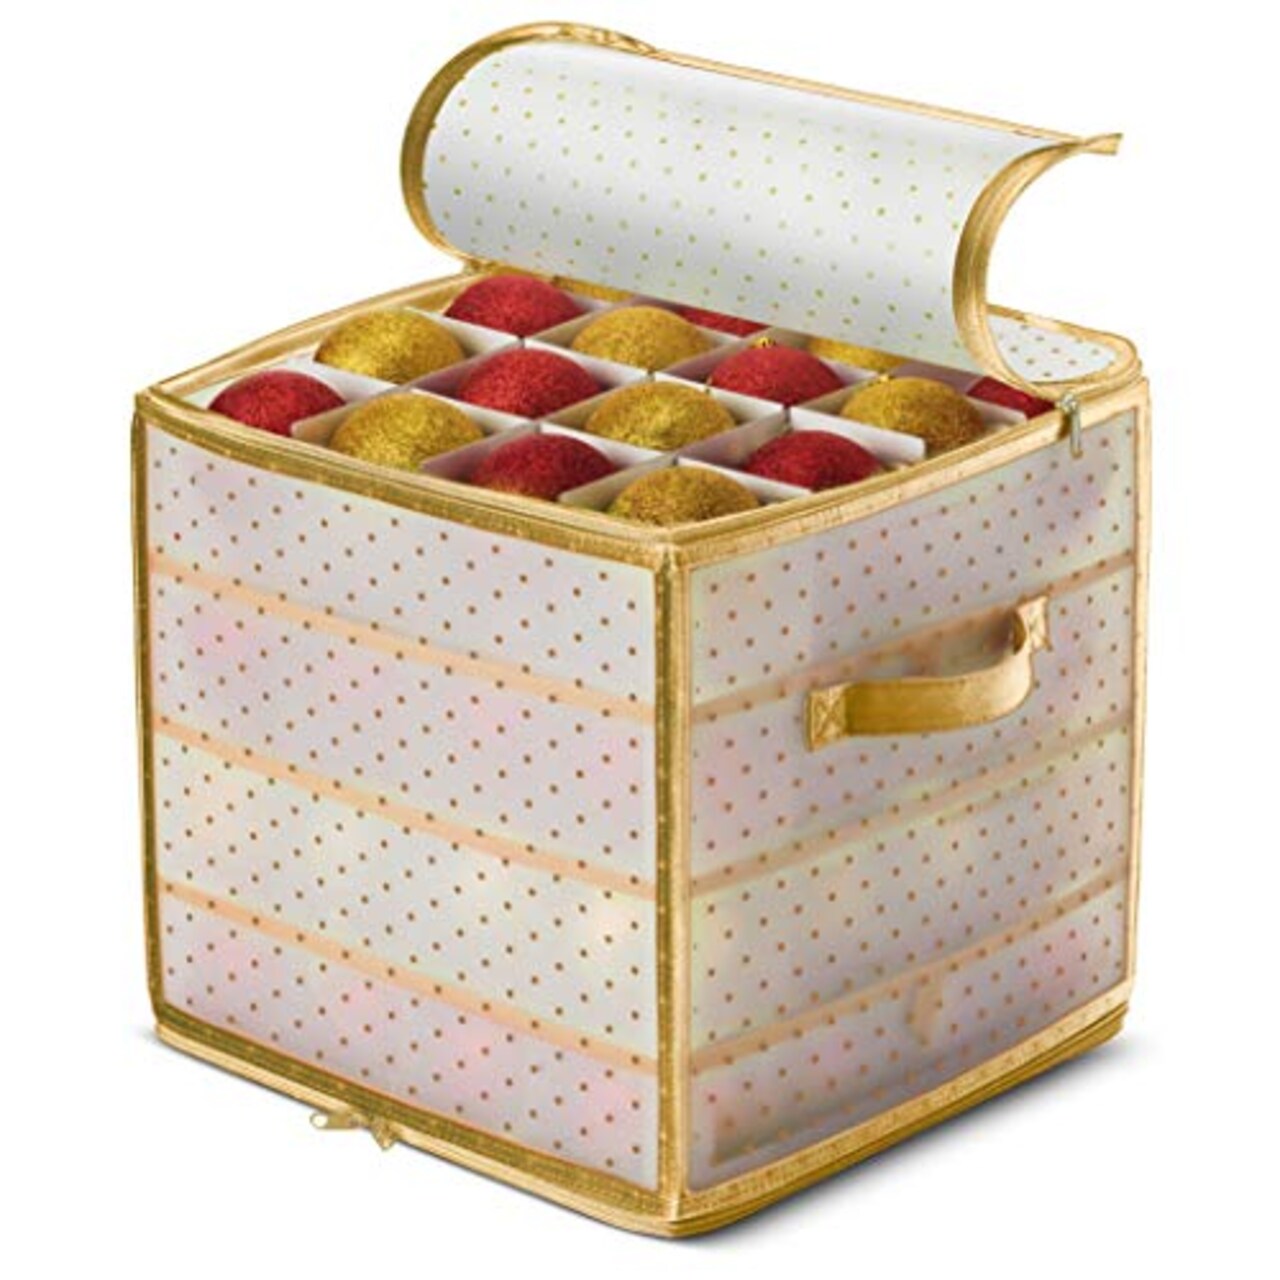 Plastic Christmas Ornament Storage Box with 2 Sided Dual Zipper Closure -  Keeps 64 Holiday Ornaments, Xmas Decorations Accessories, 3 Cube  Compartments - Sturdy Flexible Plastic (Gold)